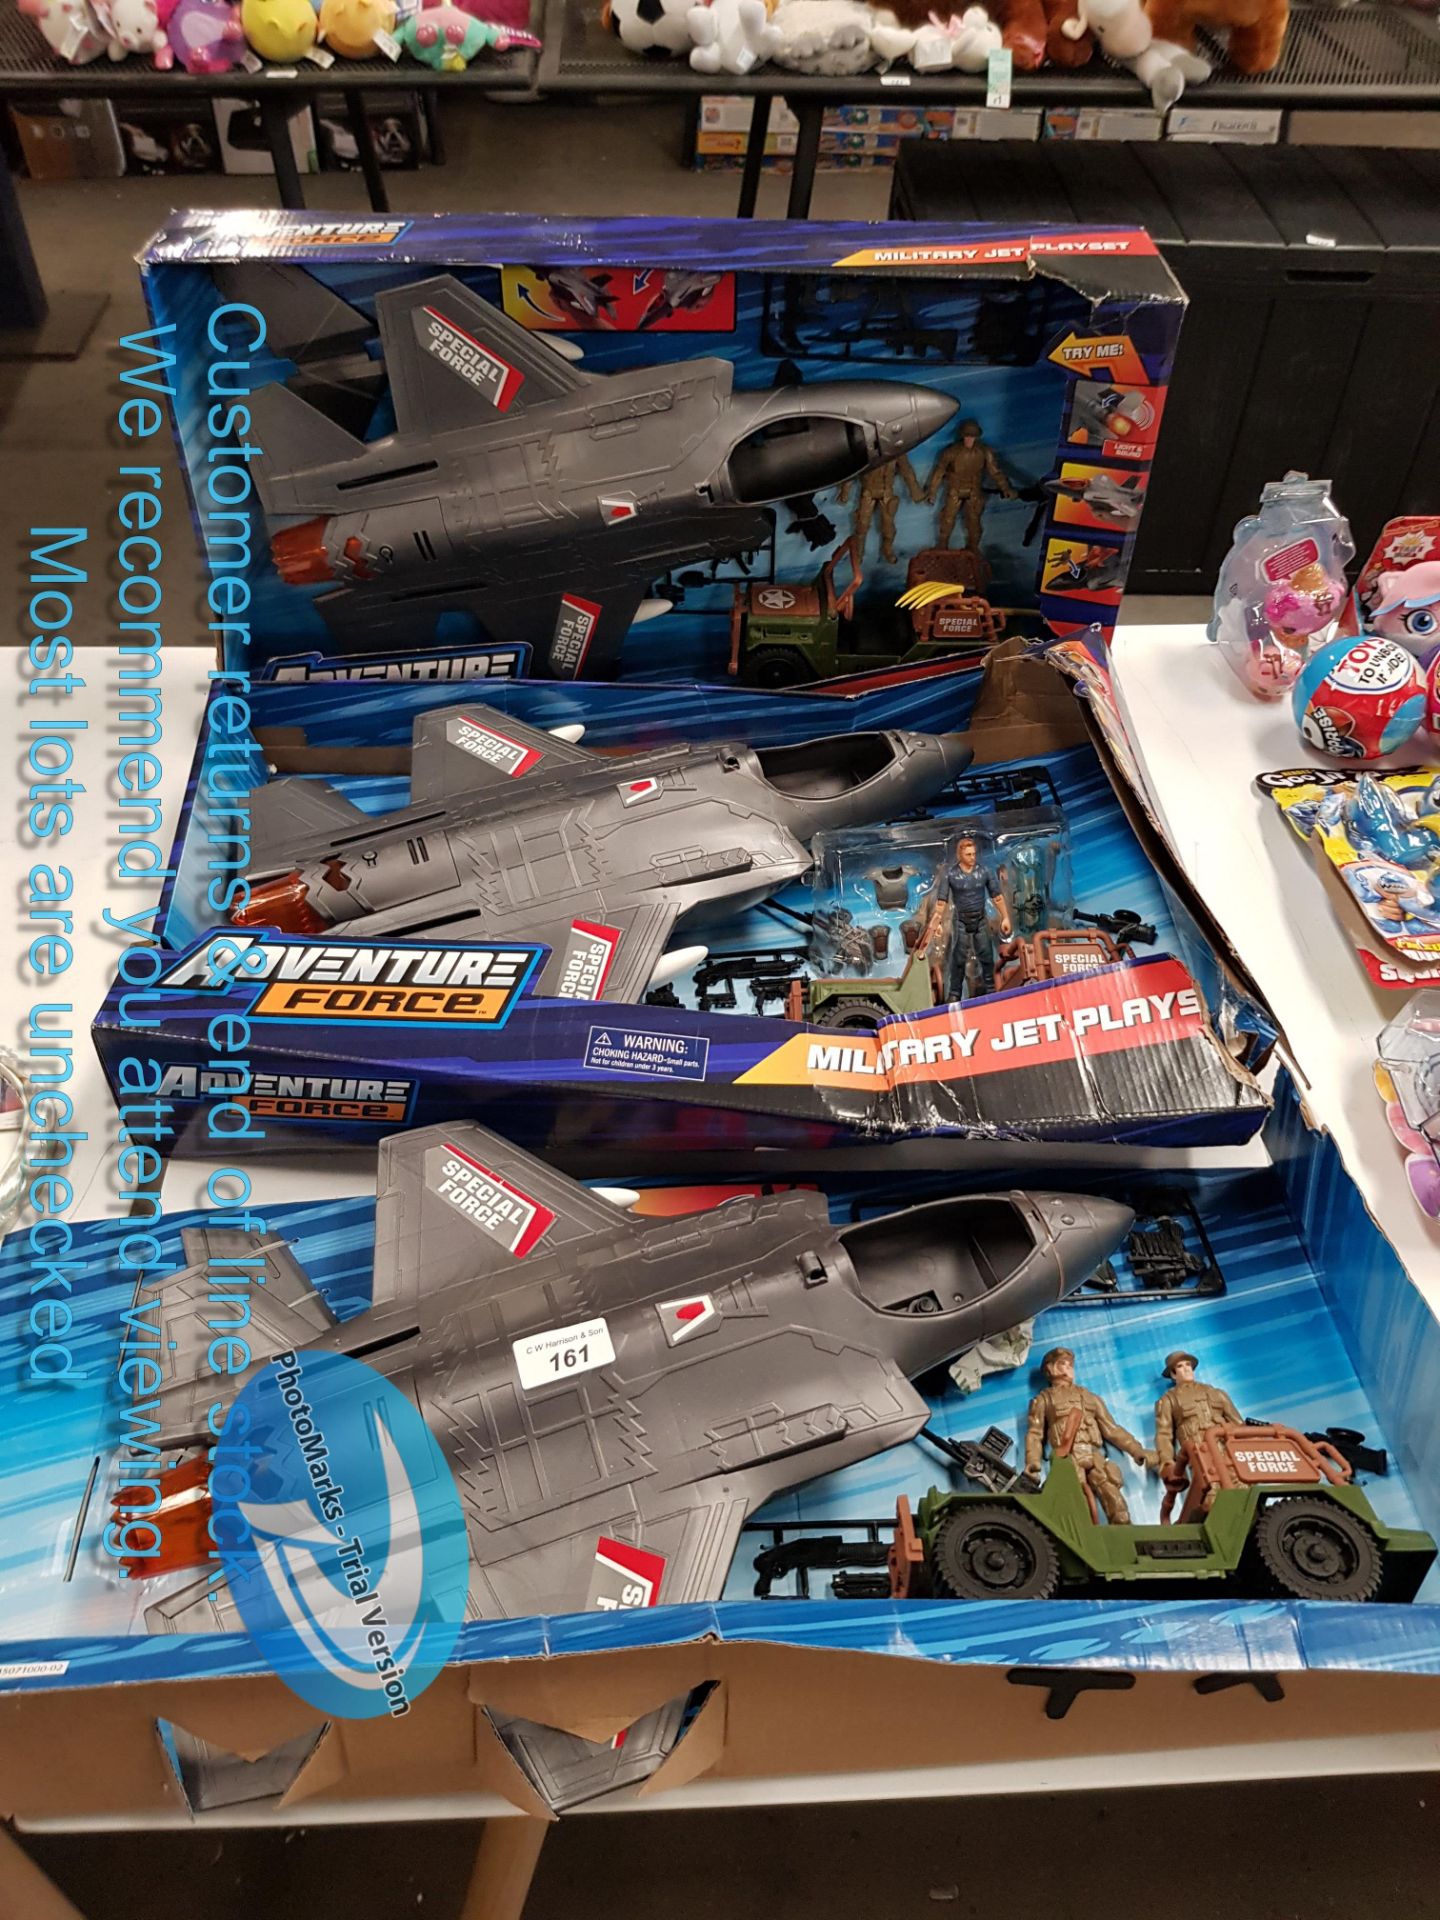 3 X ADVENTURE FORCE MILITARY JET PLAYS